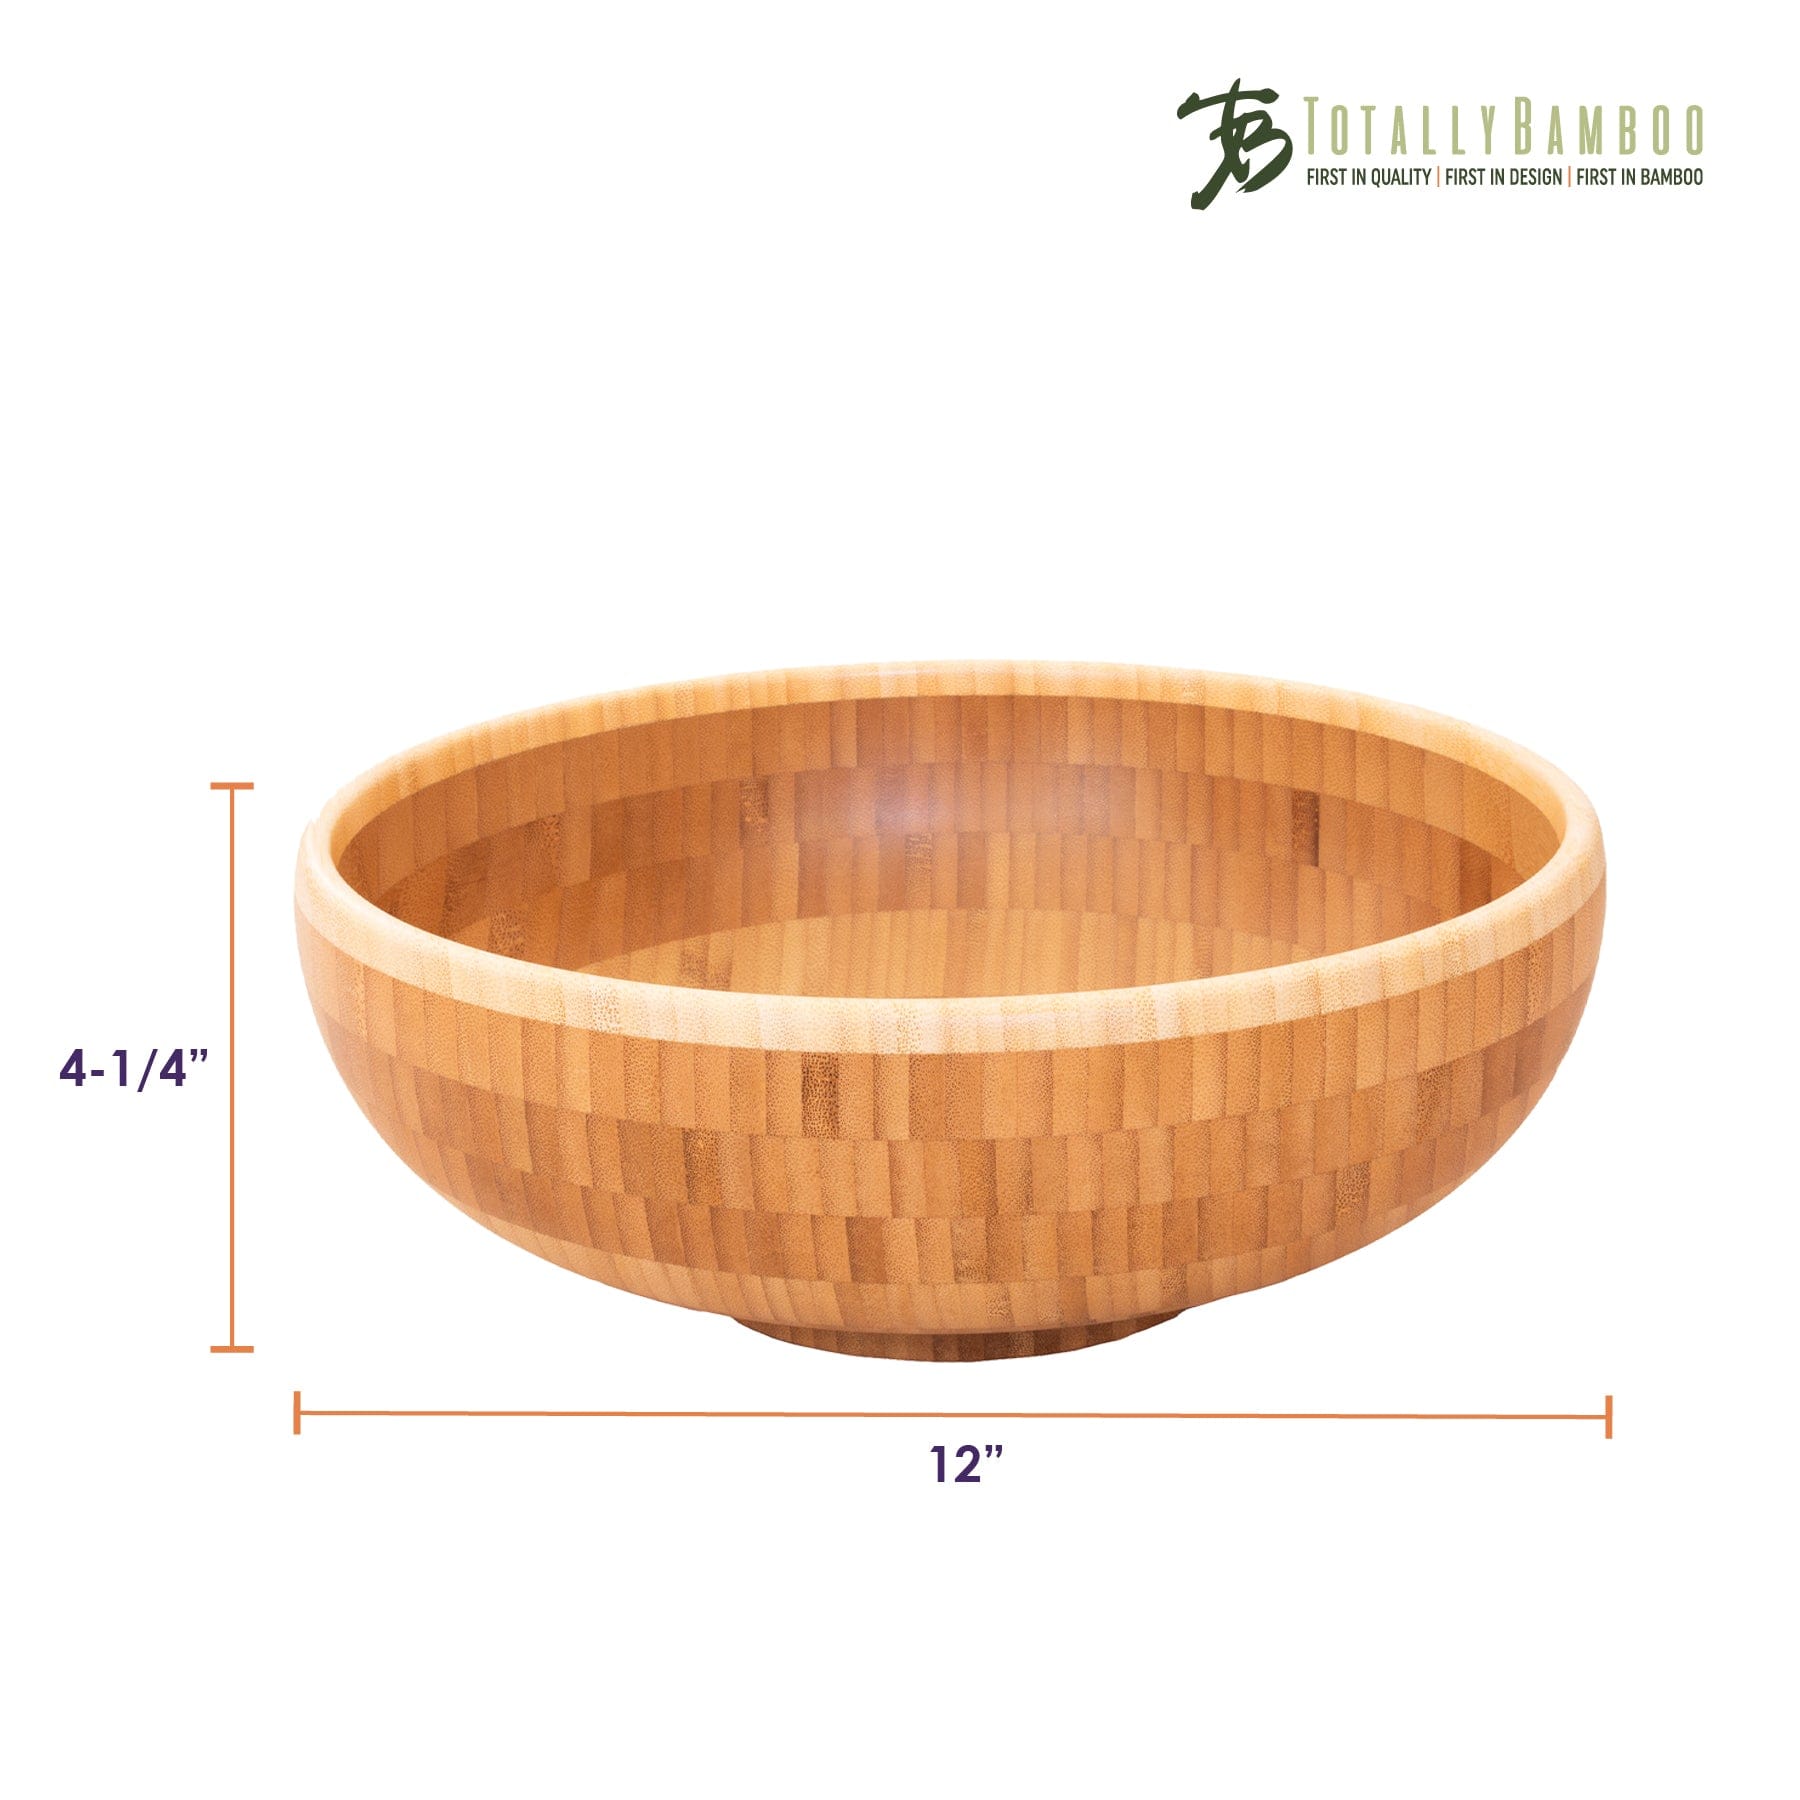 Totally Bamboo 12" Classic Bowl